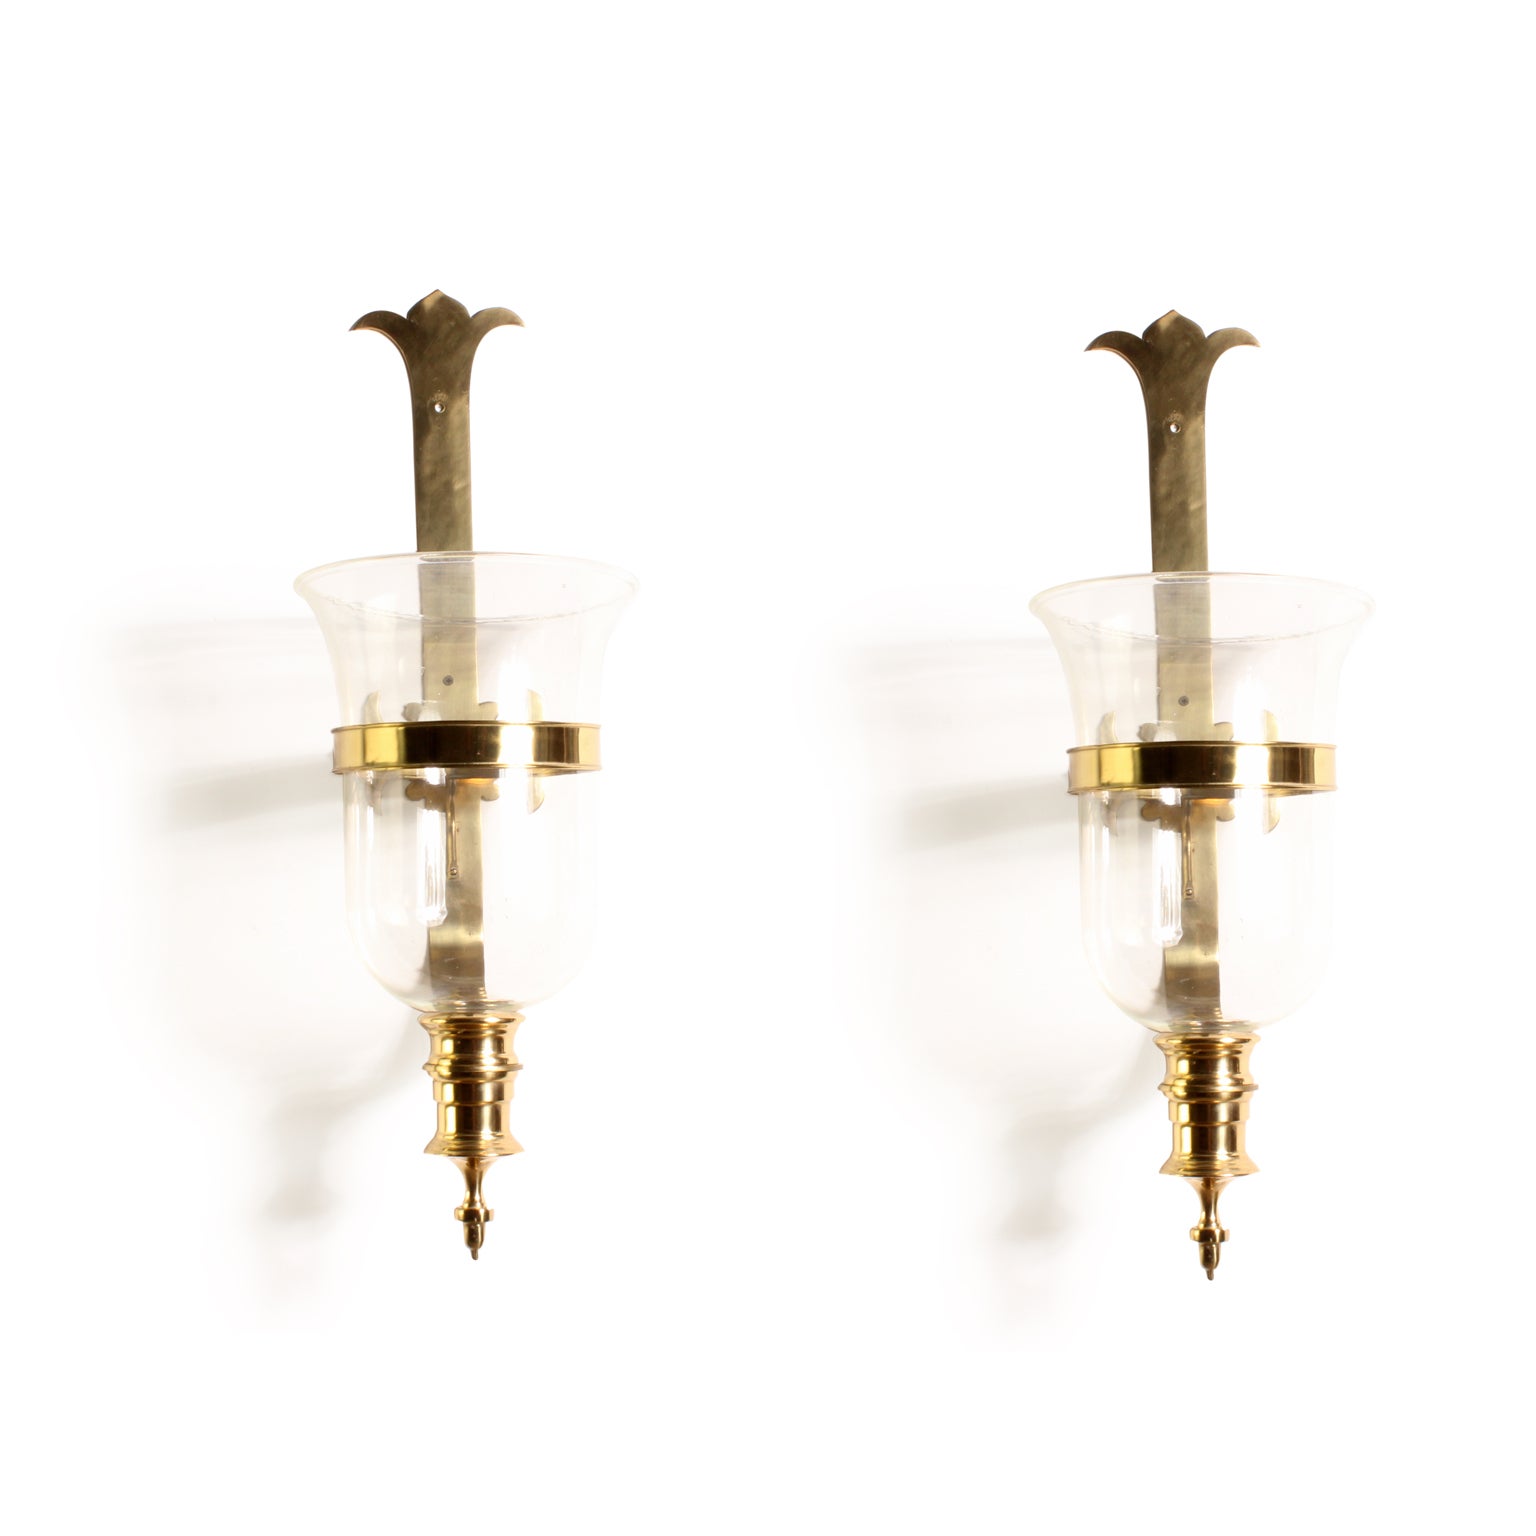 Pair of Sarreid Brass and Glass Hurricane Wall Sconces